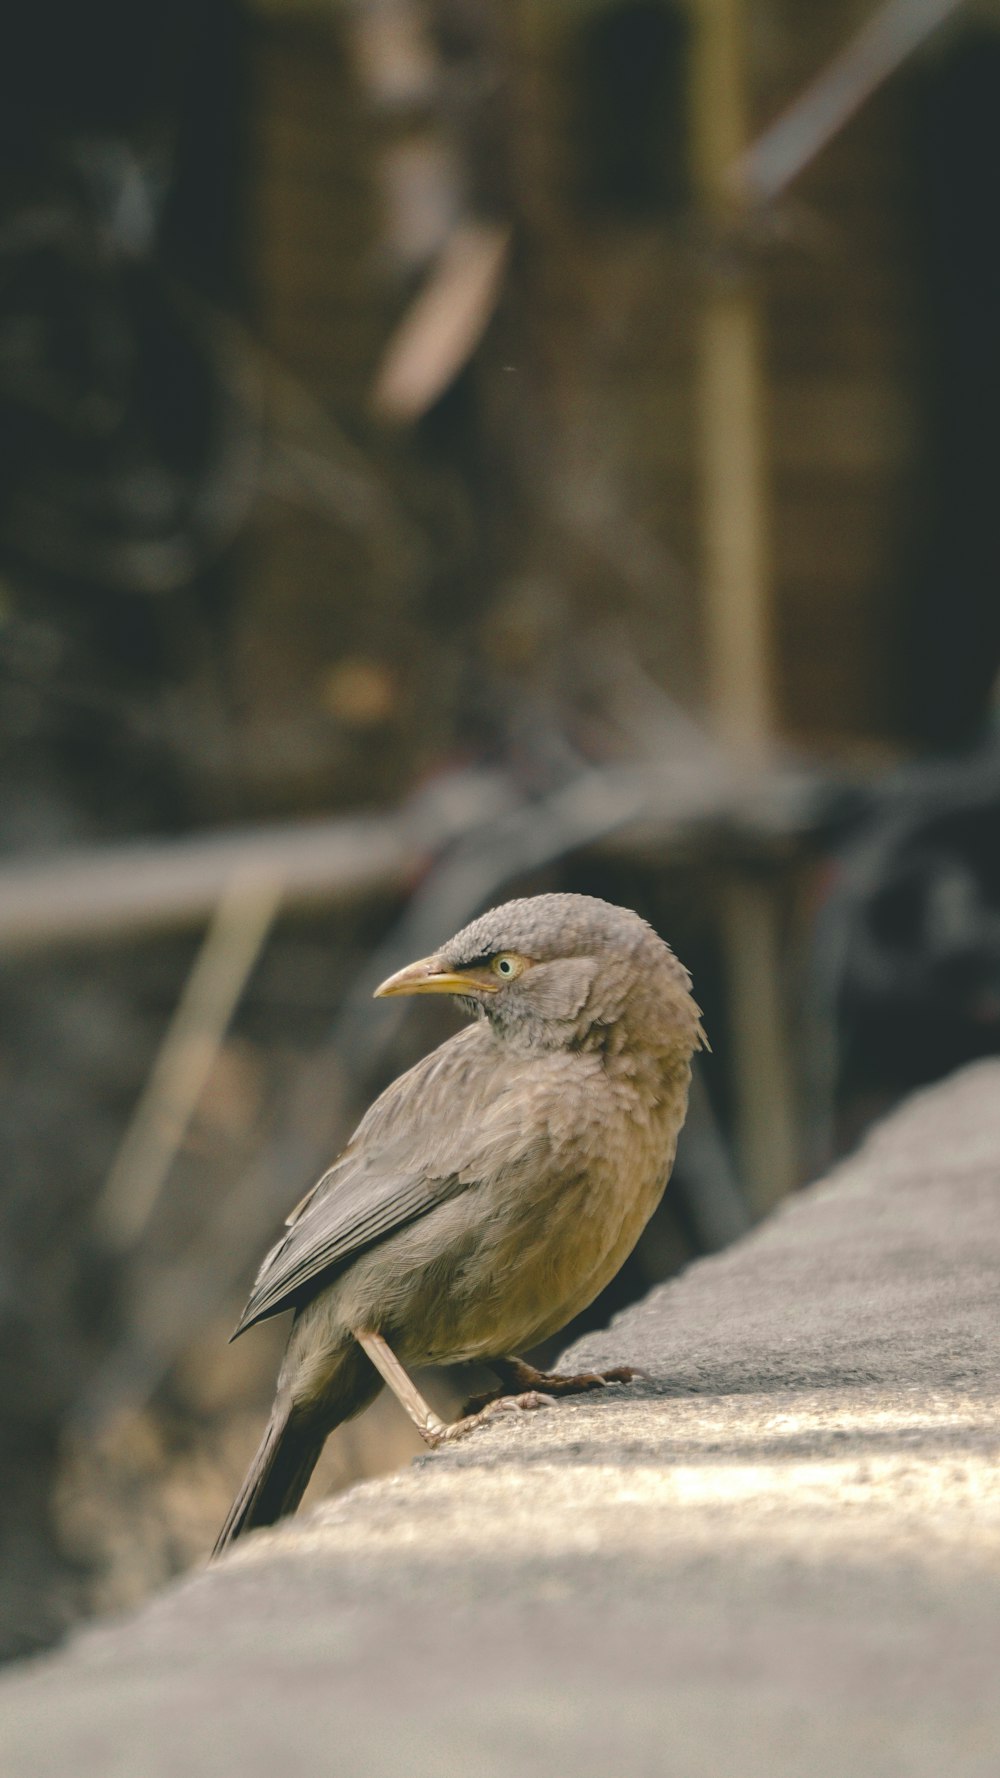 a small bird sitting on the edge of a building